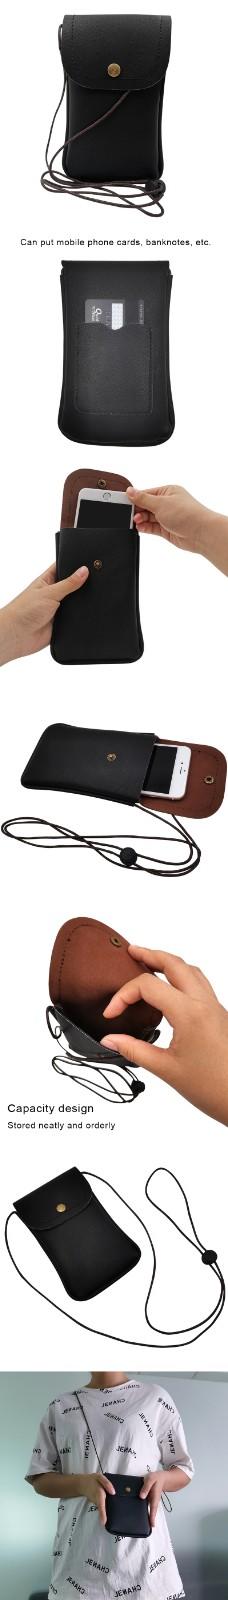 Pu&leather mobile phone bag with card slot/holder-1